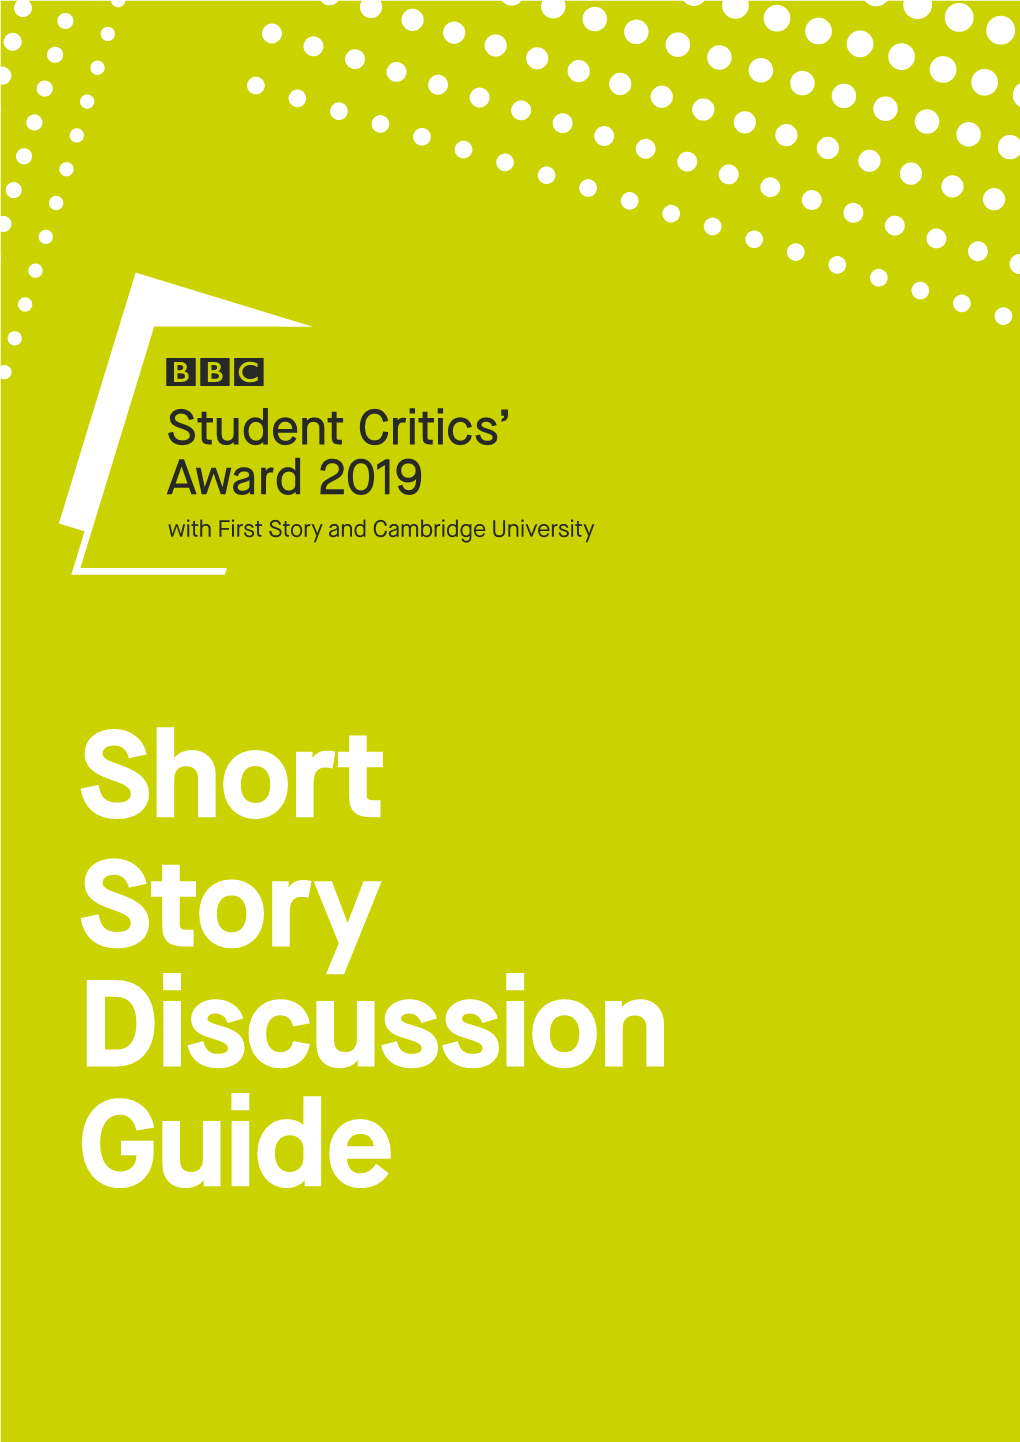 Guide to Discussing Short Stories